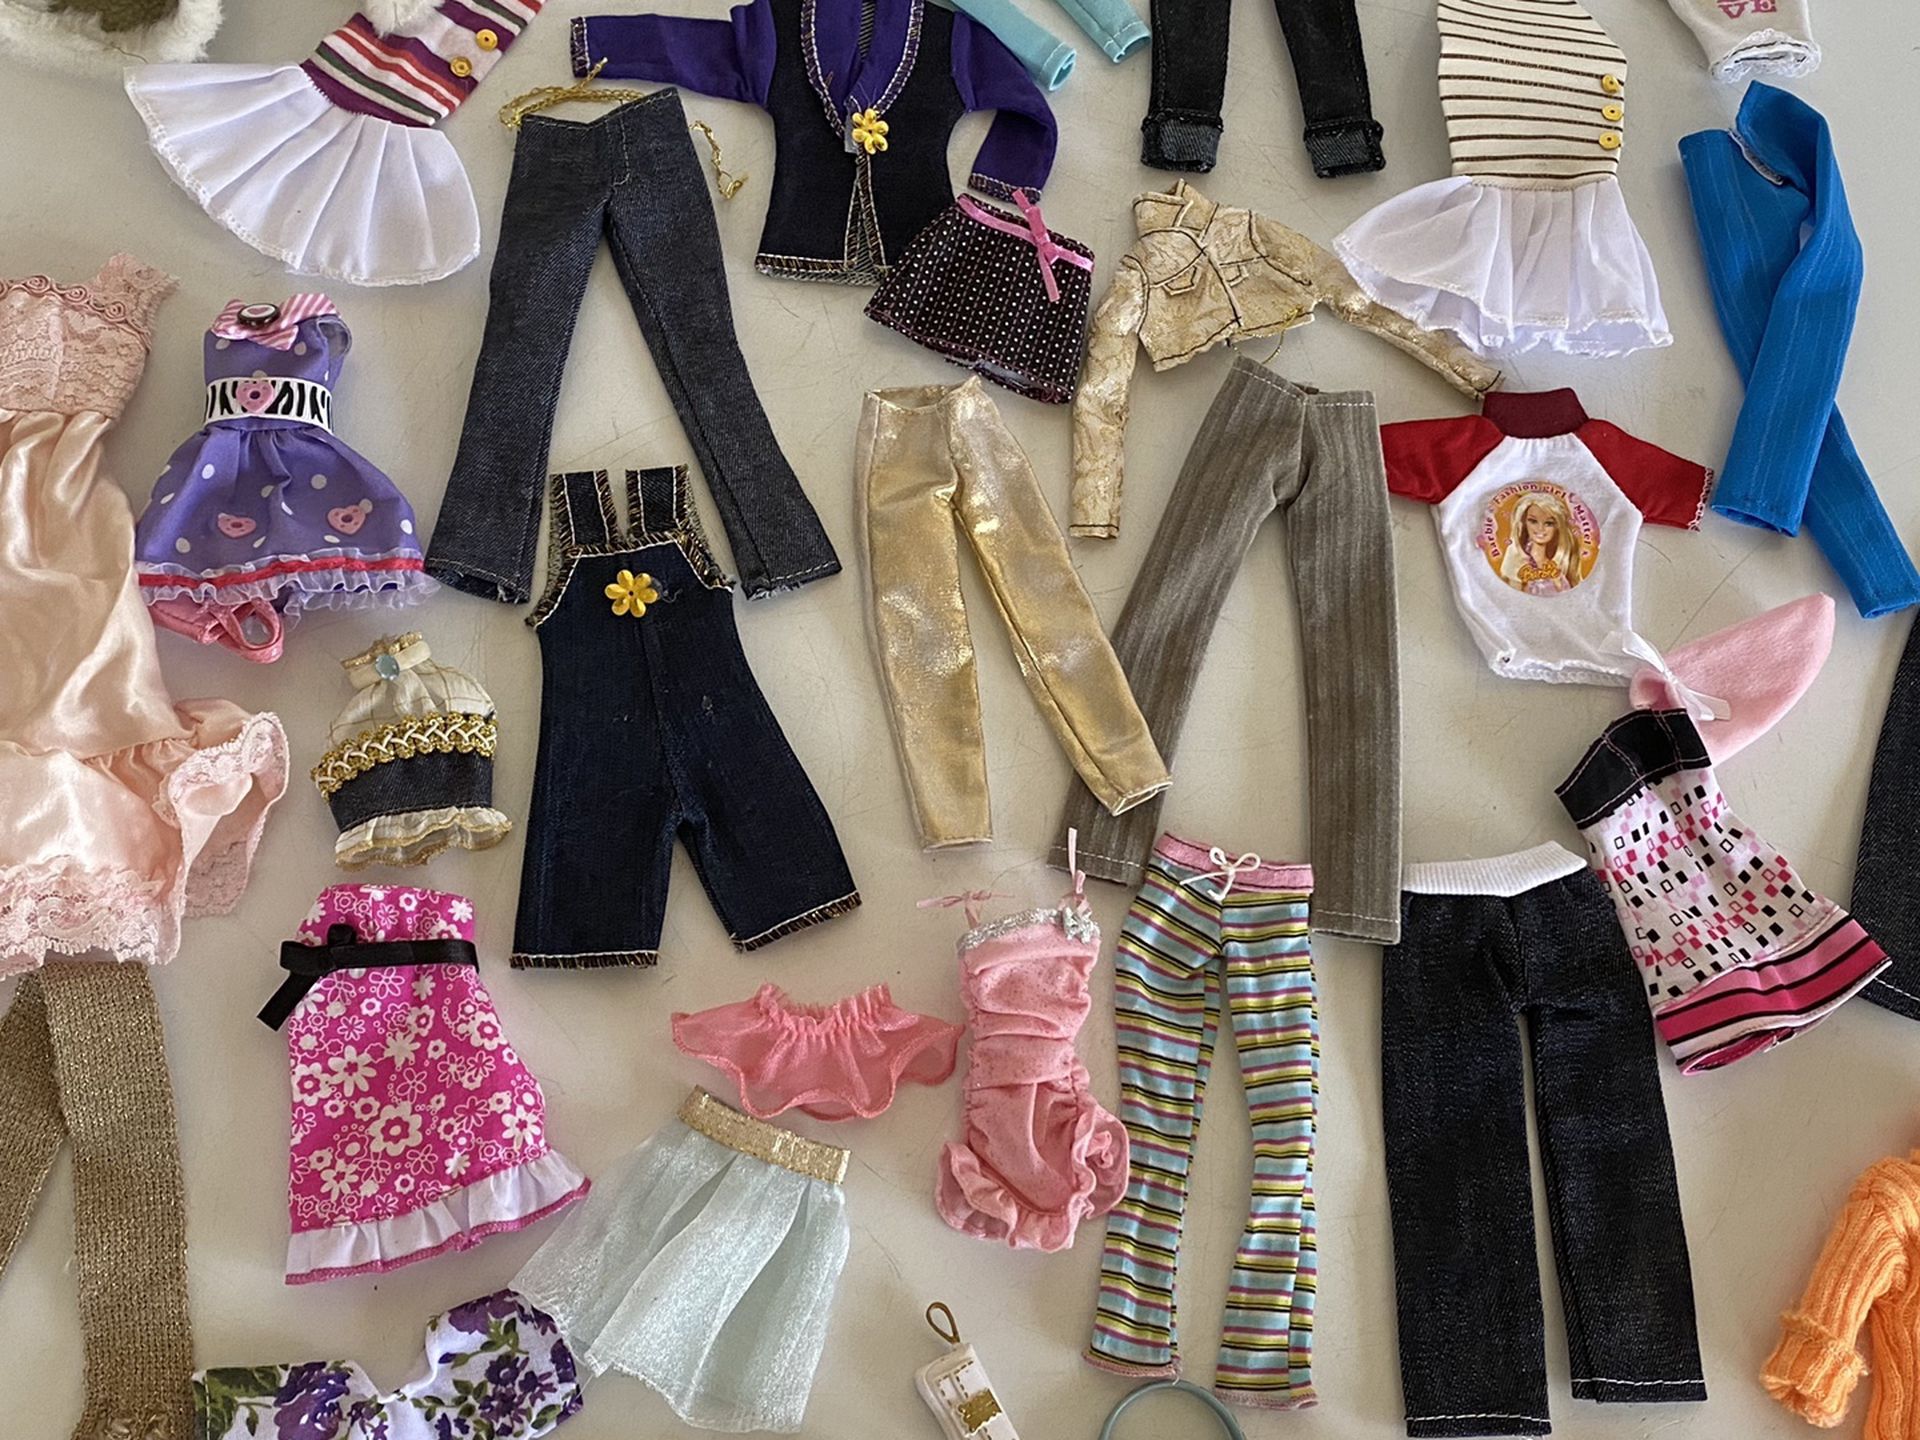 Barbies clothes, over 40 items